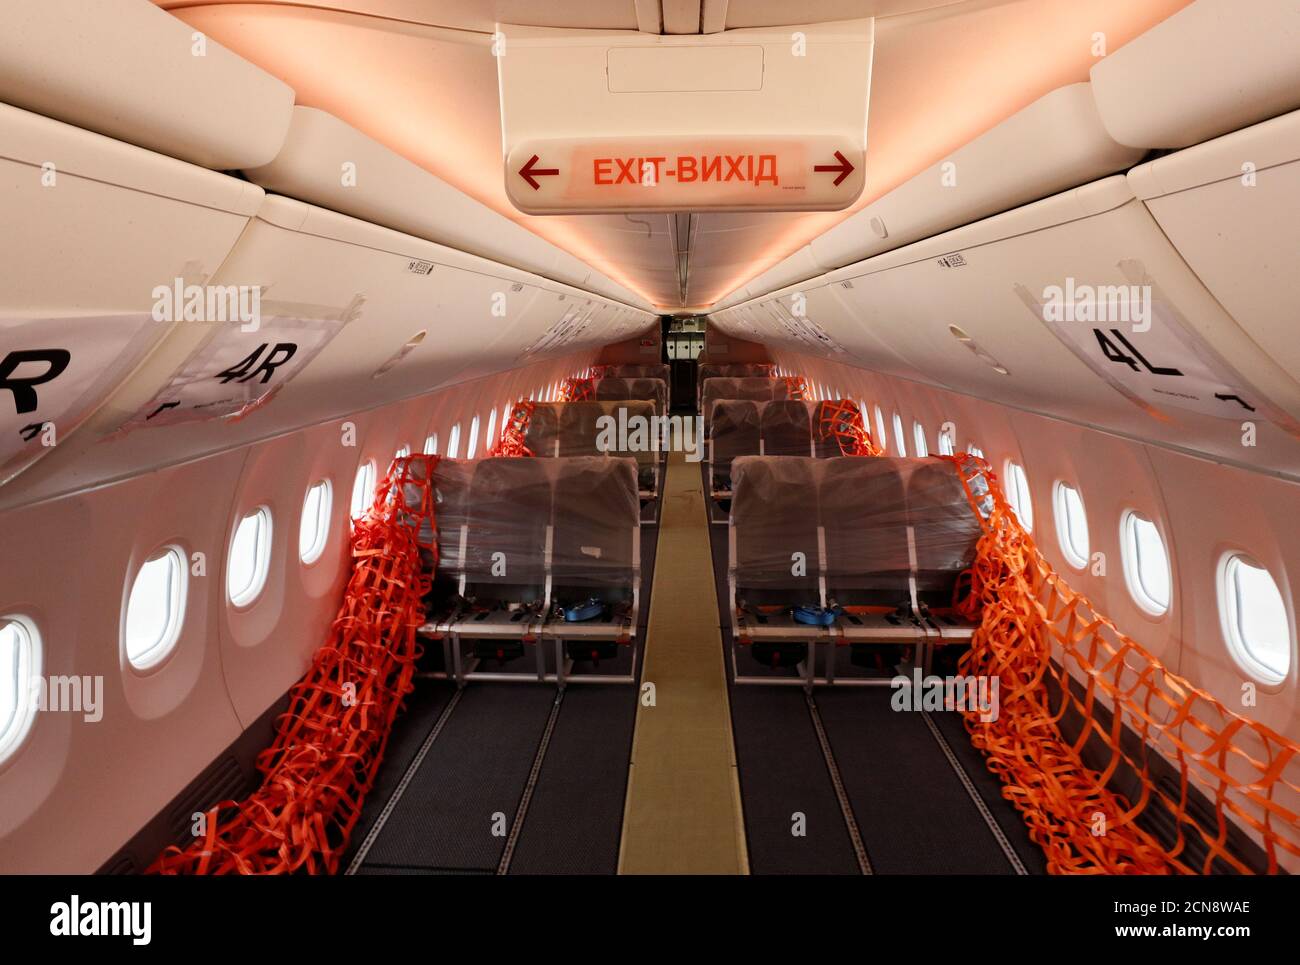 An interior view shows a Boeing 737-800 aircraft of Ukrainian low-cost  airline SkyUp which converted most of its passenger planes to carry cargo  amid the coronavirus disease (COVID-19) outbreak, at the Boryspil